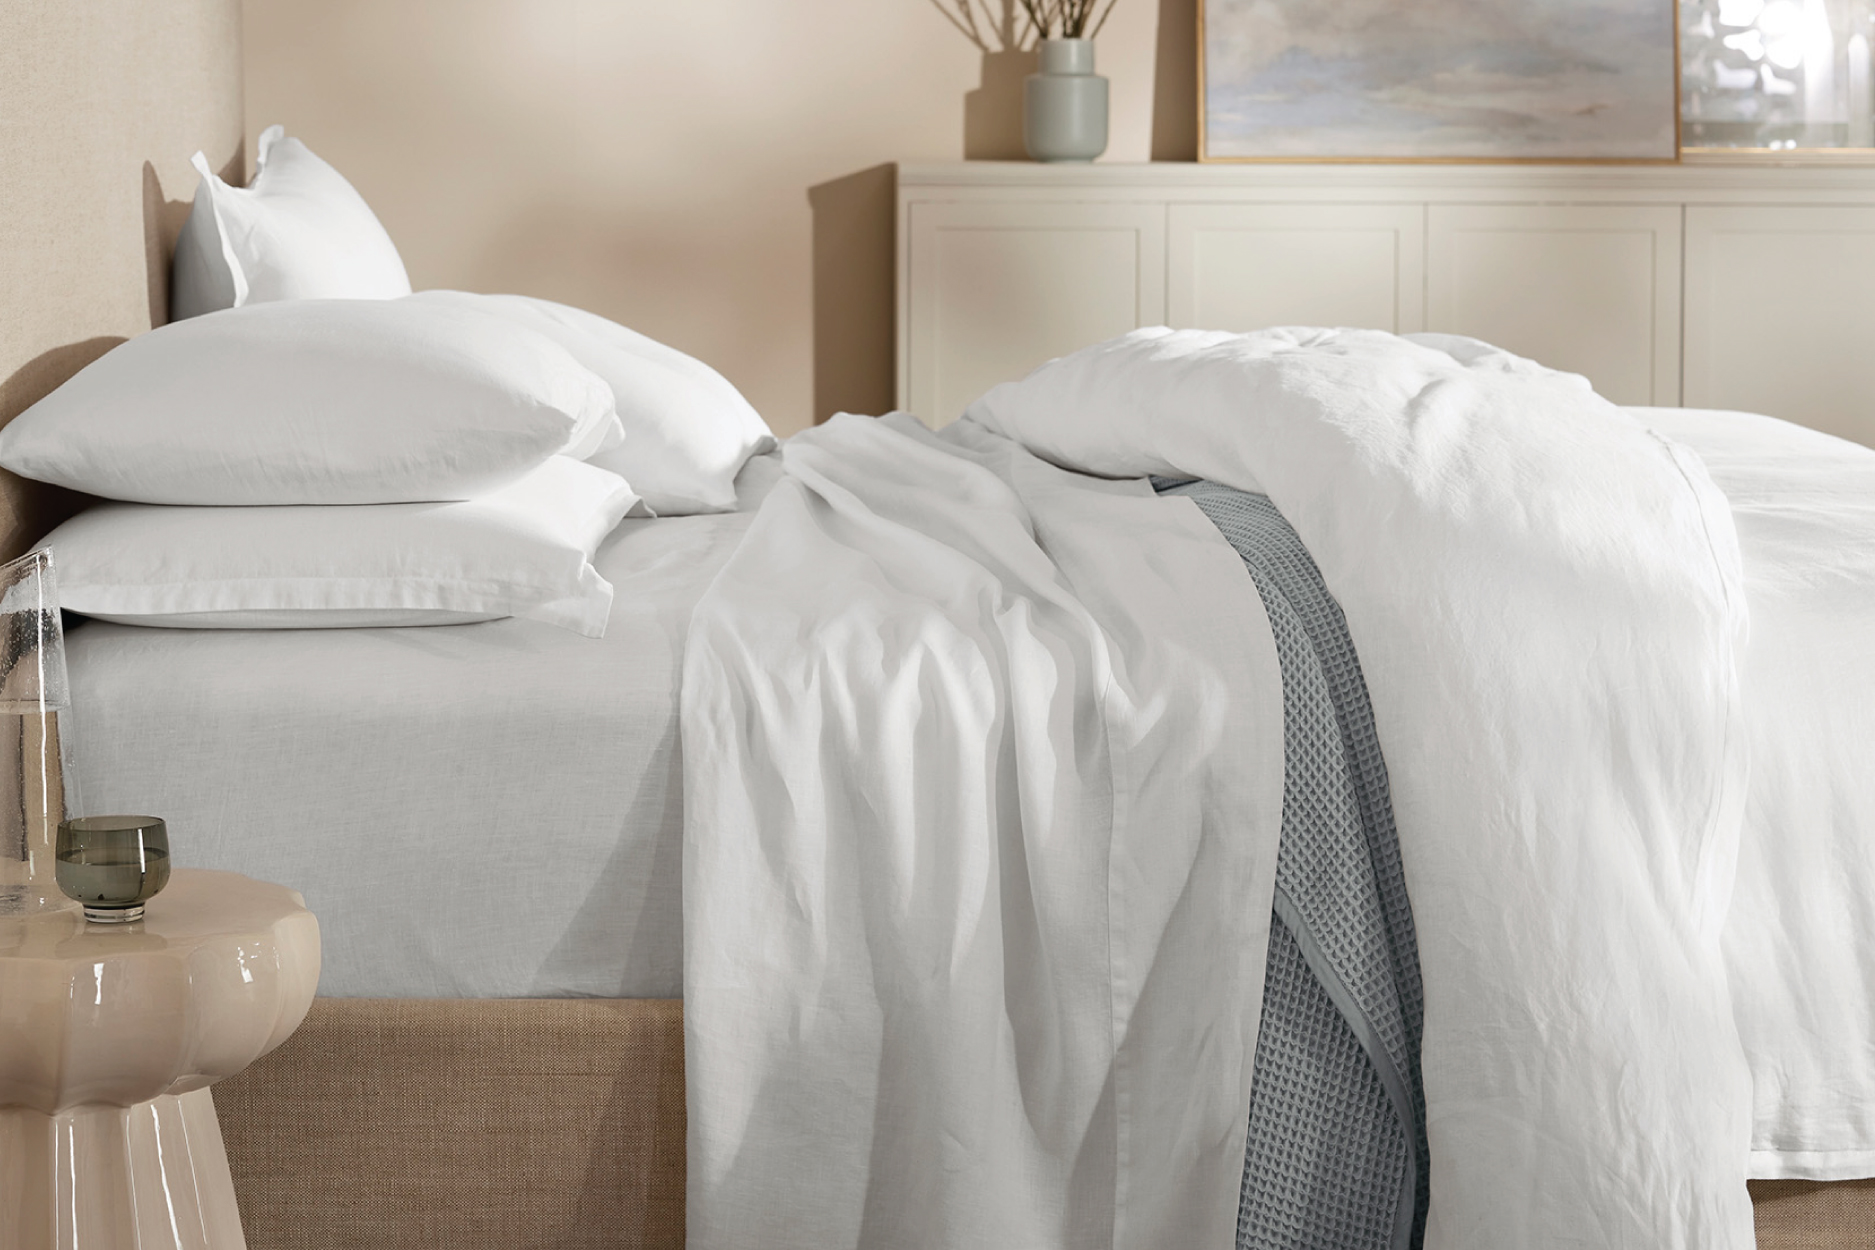 Makeover Time! 3 Easy Ways to Refresh Your Bedding